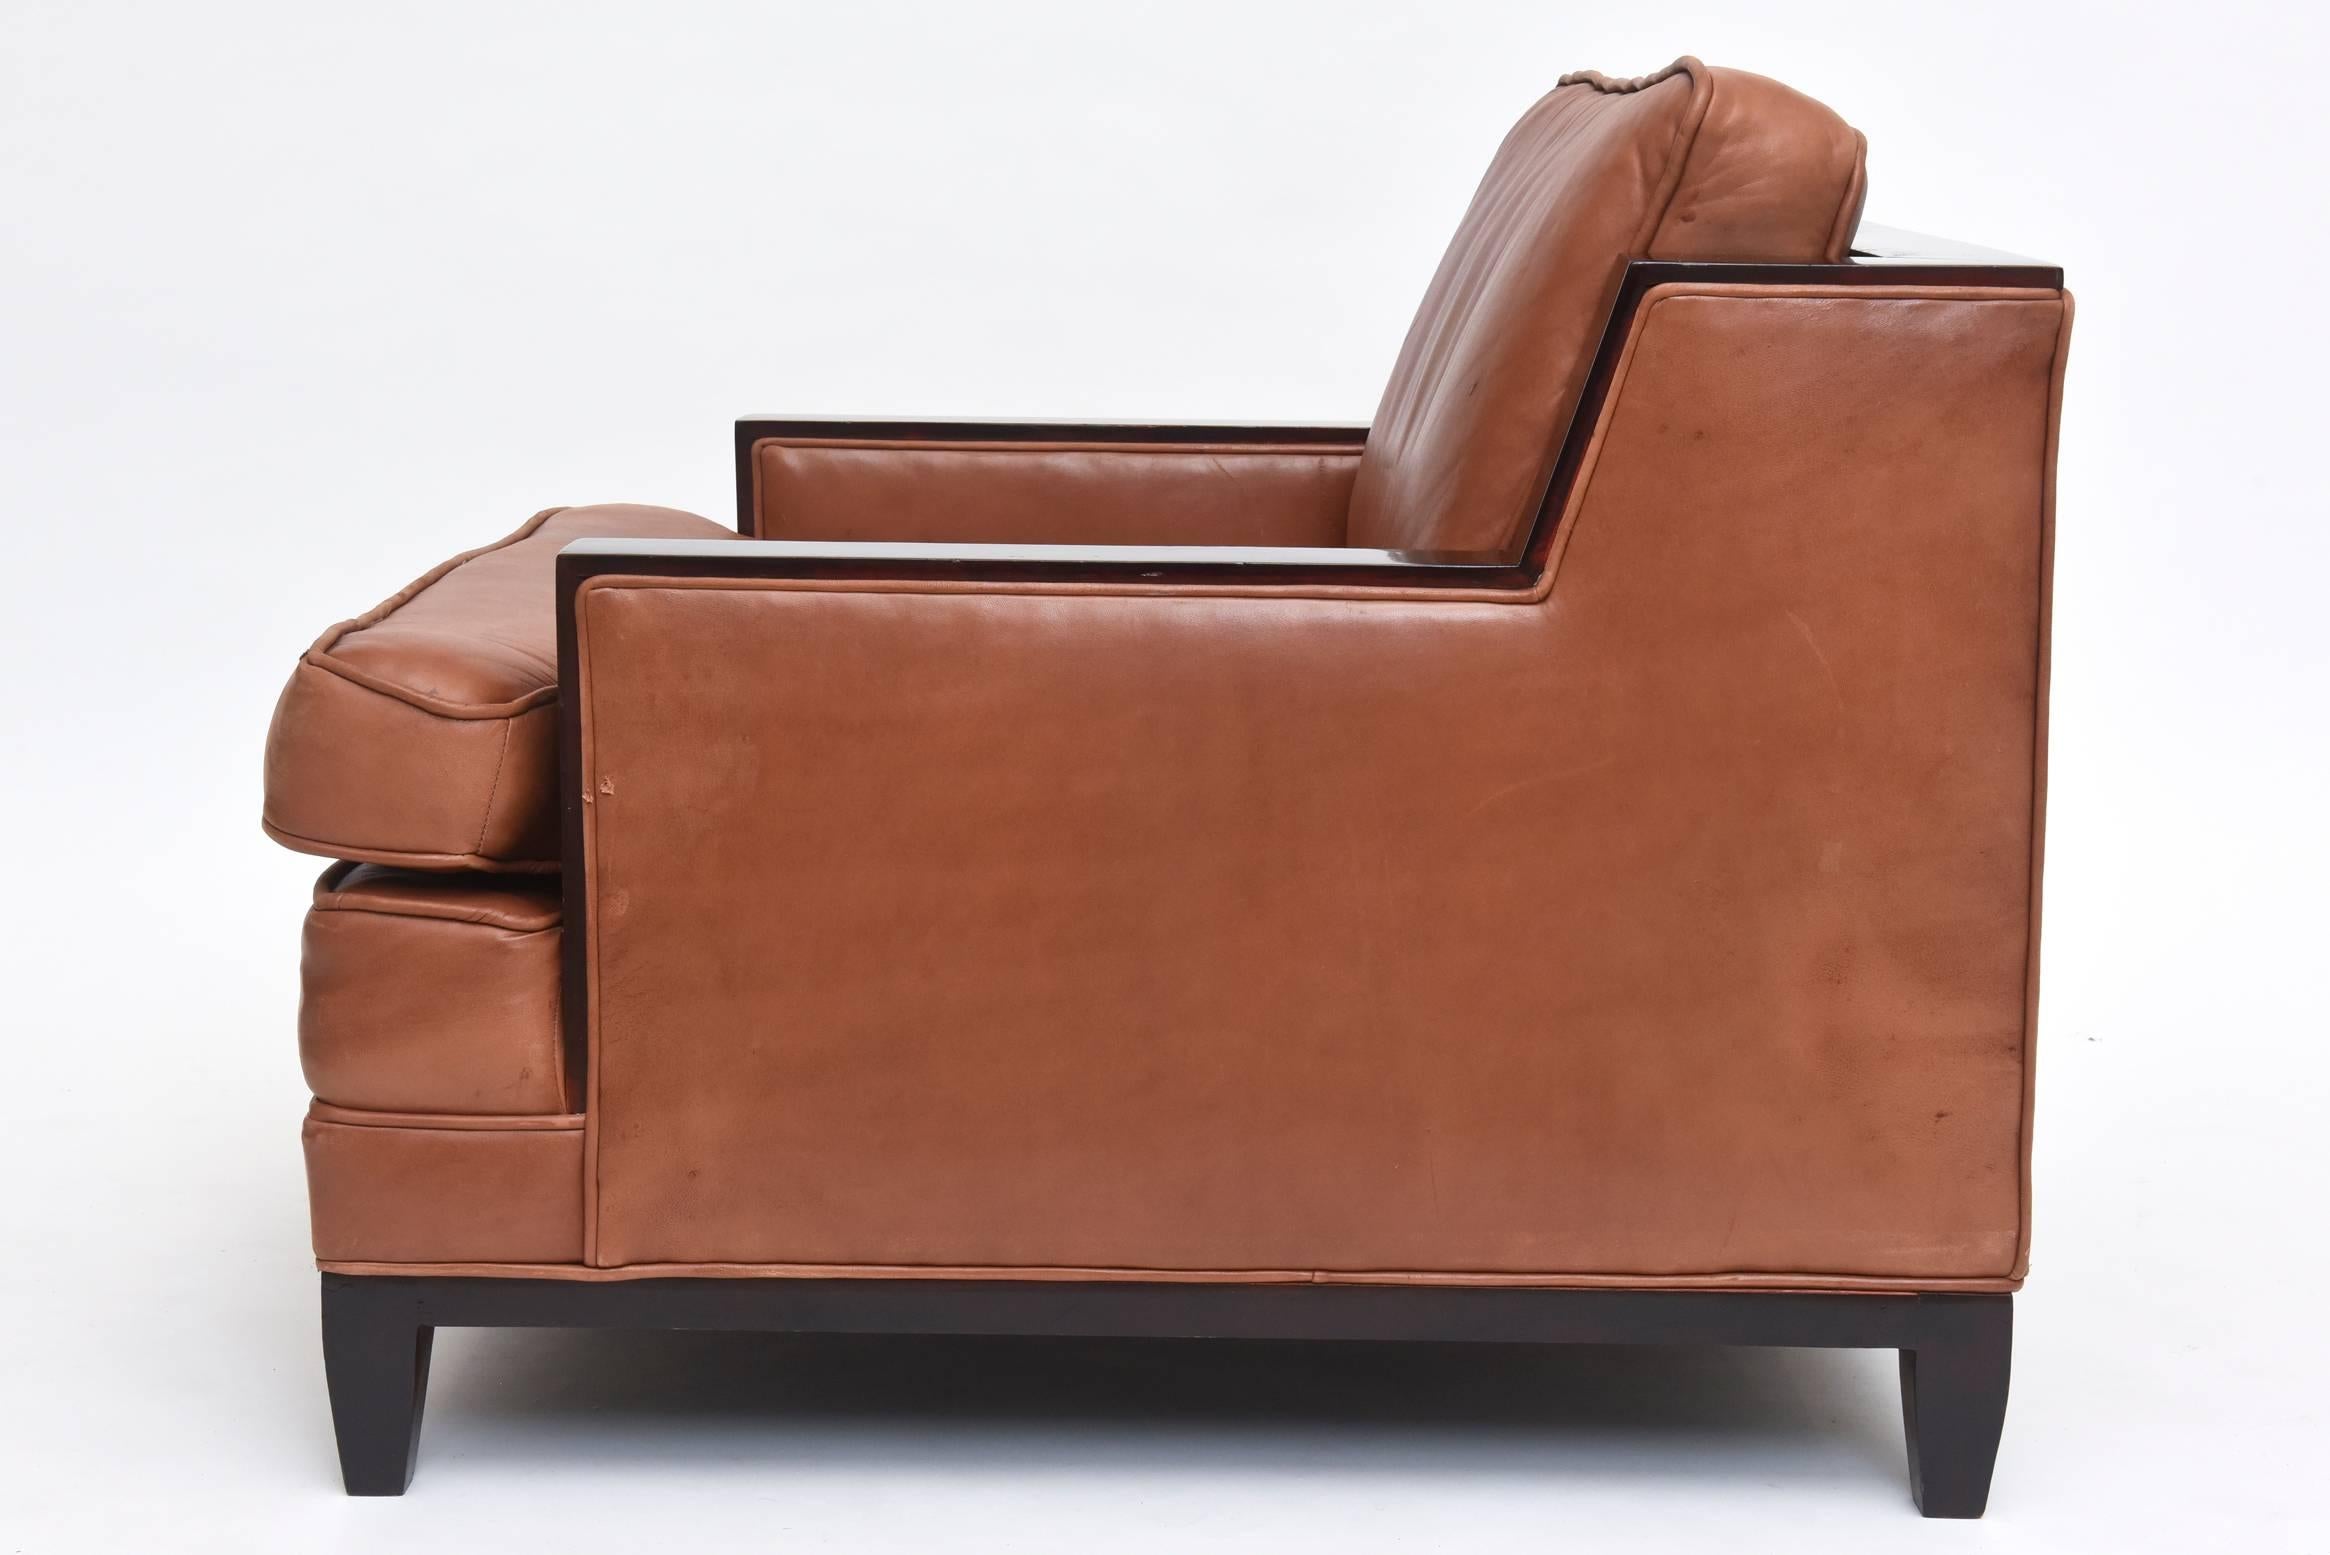 20th Century Pair of French Modern Leather Club Chairs Attributed to Jacques Adnet, 1940s